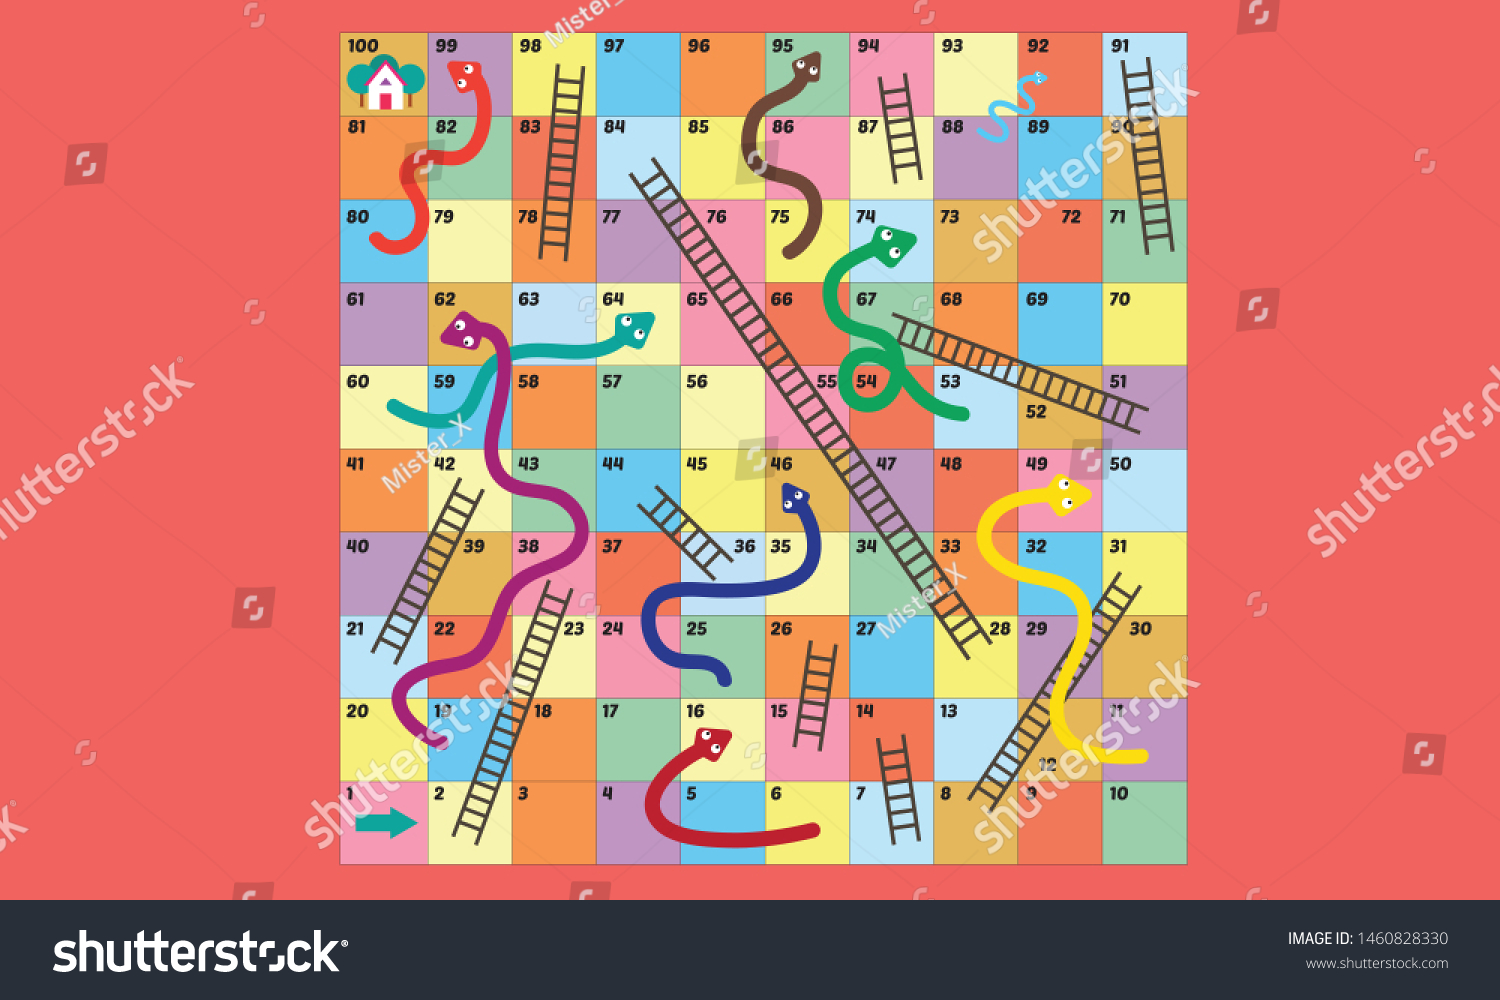 Snakes ladders images stock photos d objects vectors